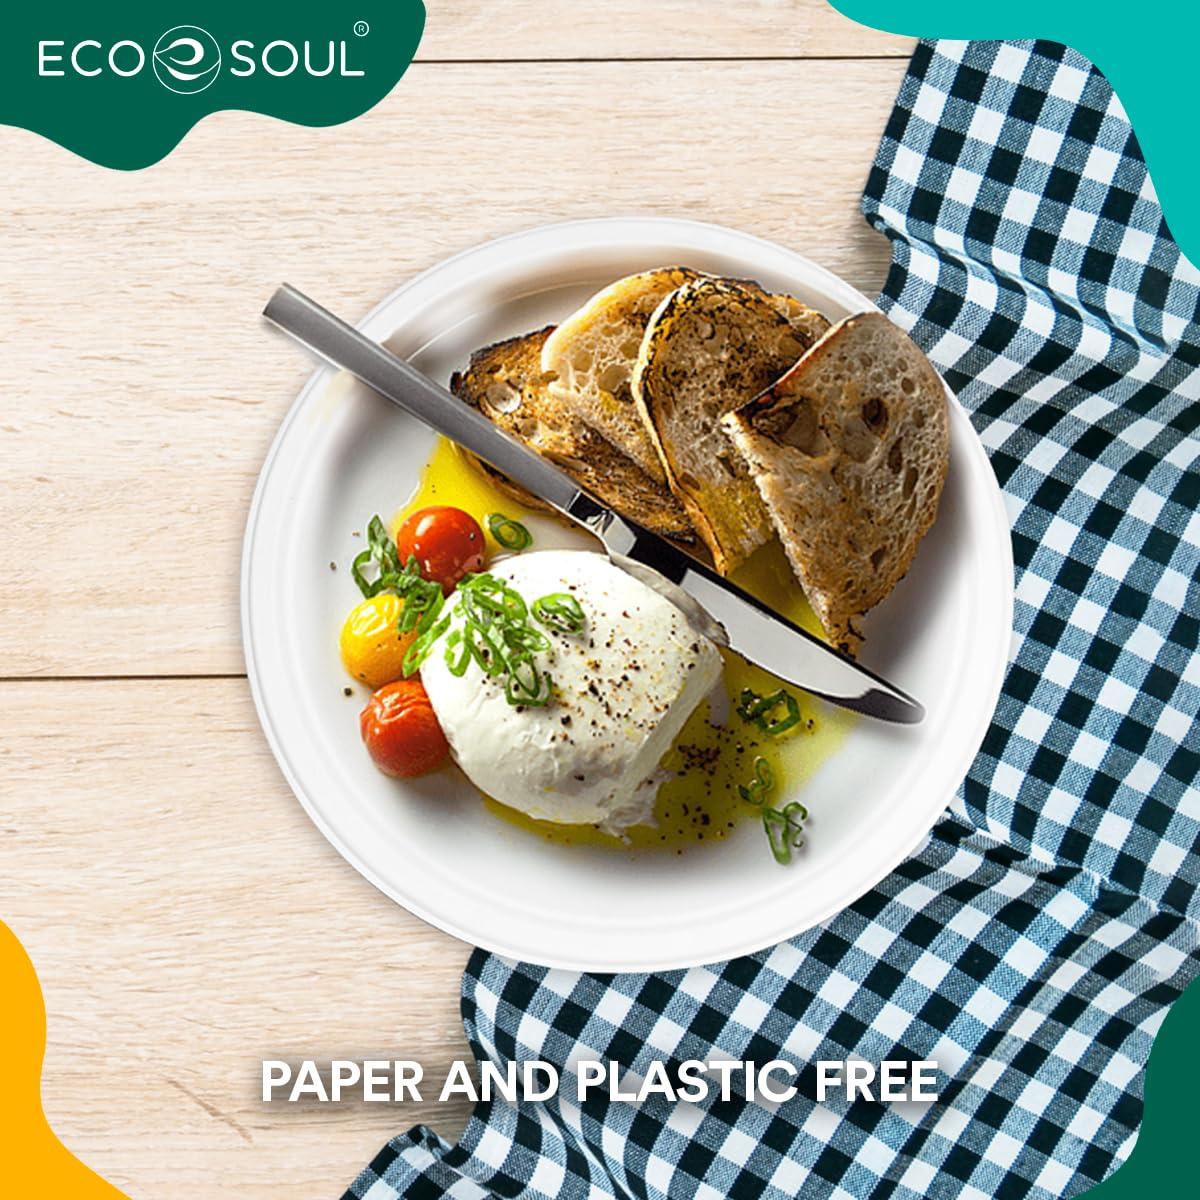 ECO SOUL Pearl White Round 15cm(6") Bagasse Plates, 10x Times Sturdy Than Paper Plates(Pack of 100), Disposable Tableware, 100% Compostable, Eco Friendly Alternative to Plastic Plates, Microwavable 4